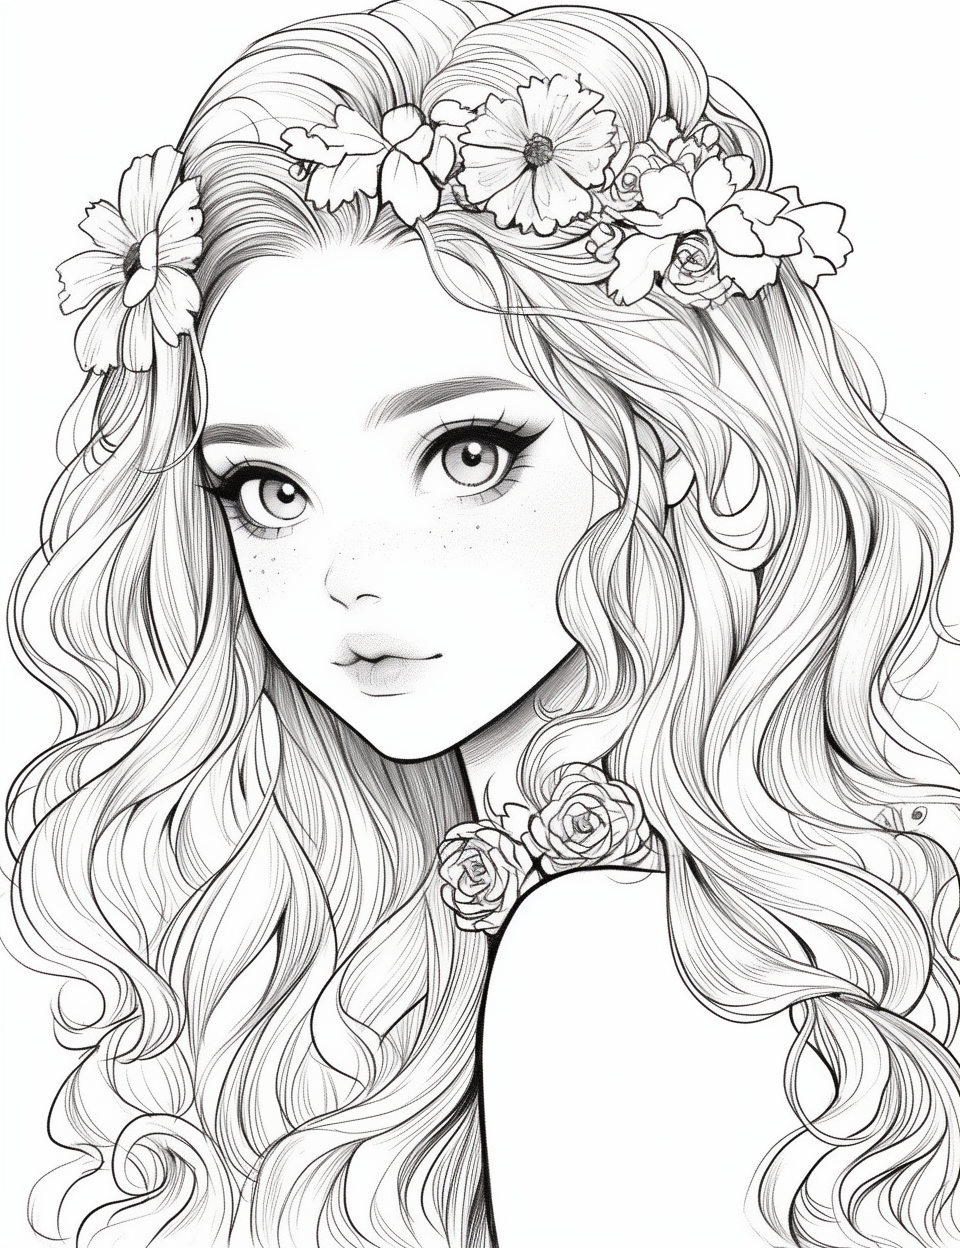 Flower girl coloring page color drawing art manga coloring book coloring book art